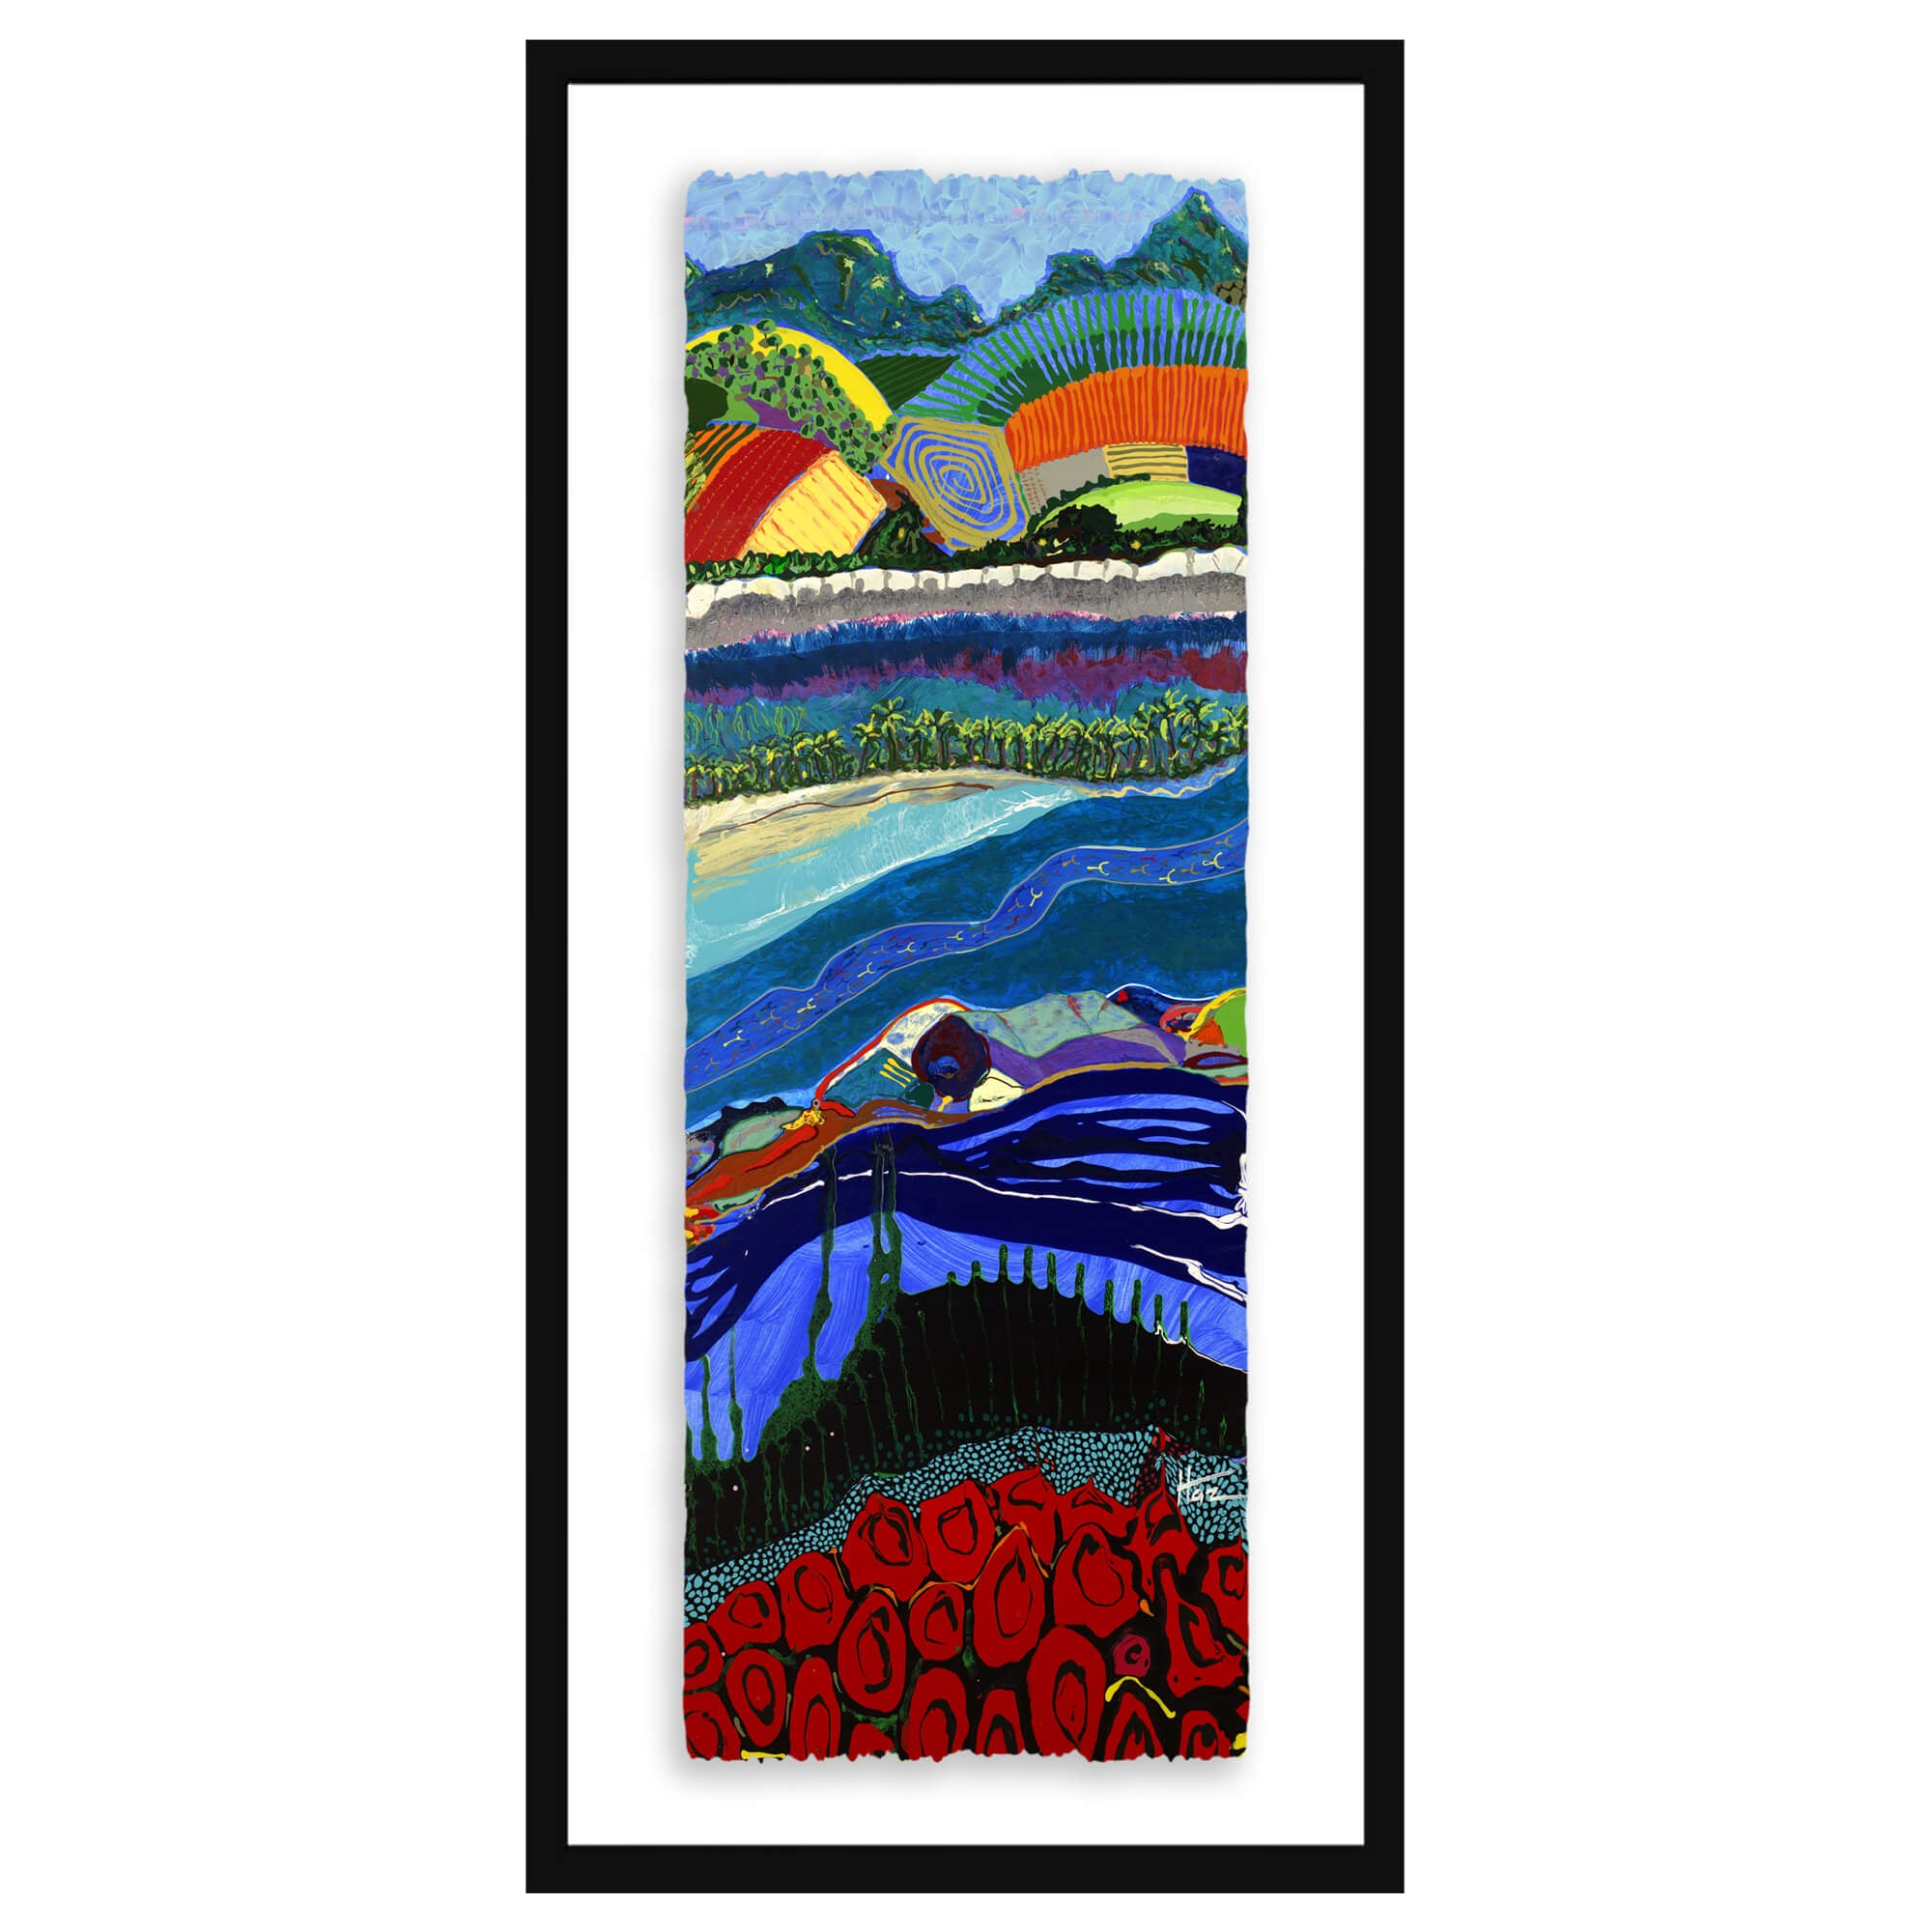 Paper art print with black frame featuring a landscape with trees by hawaii artist robert hazzard